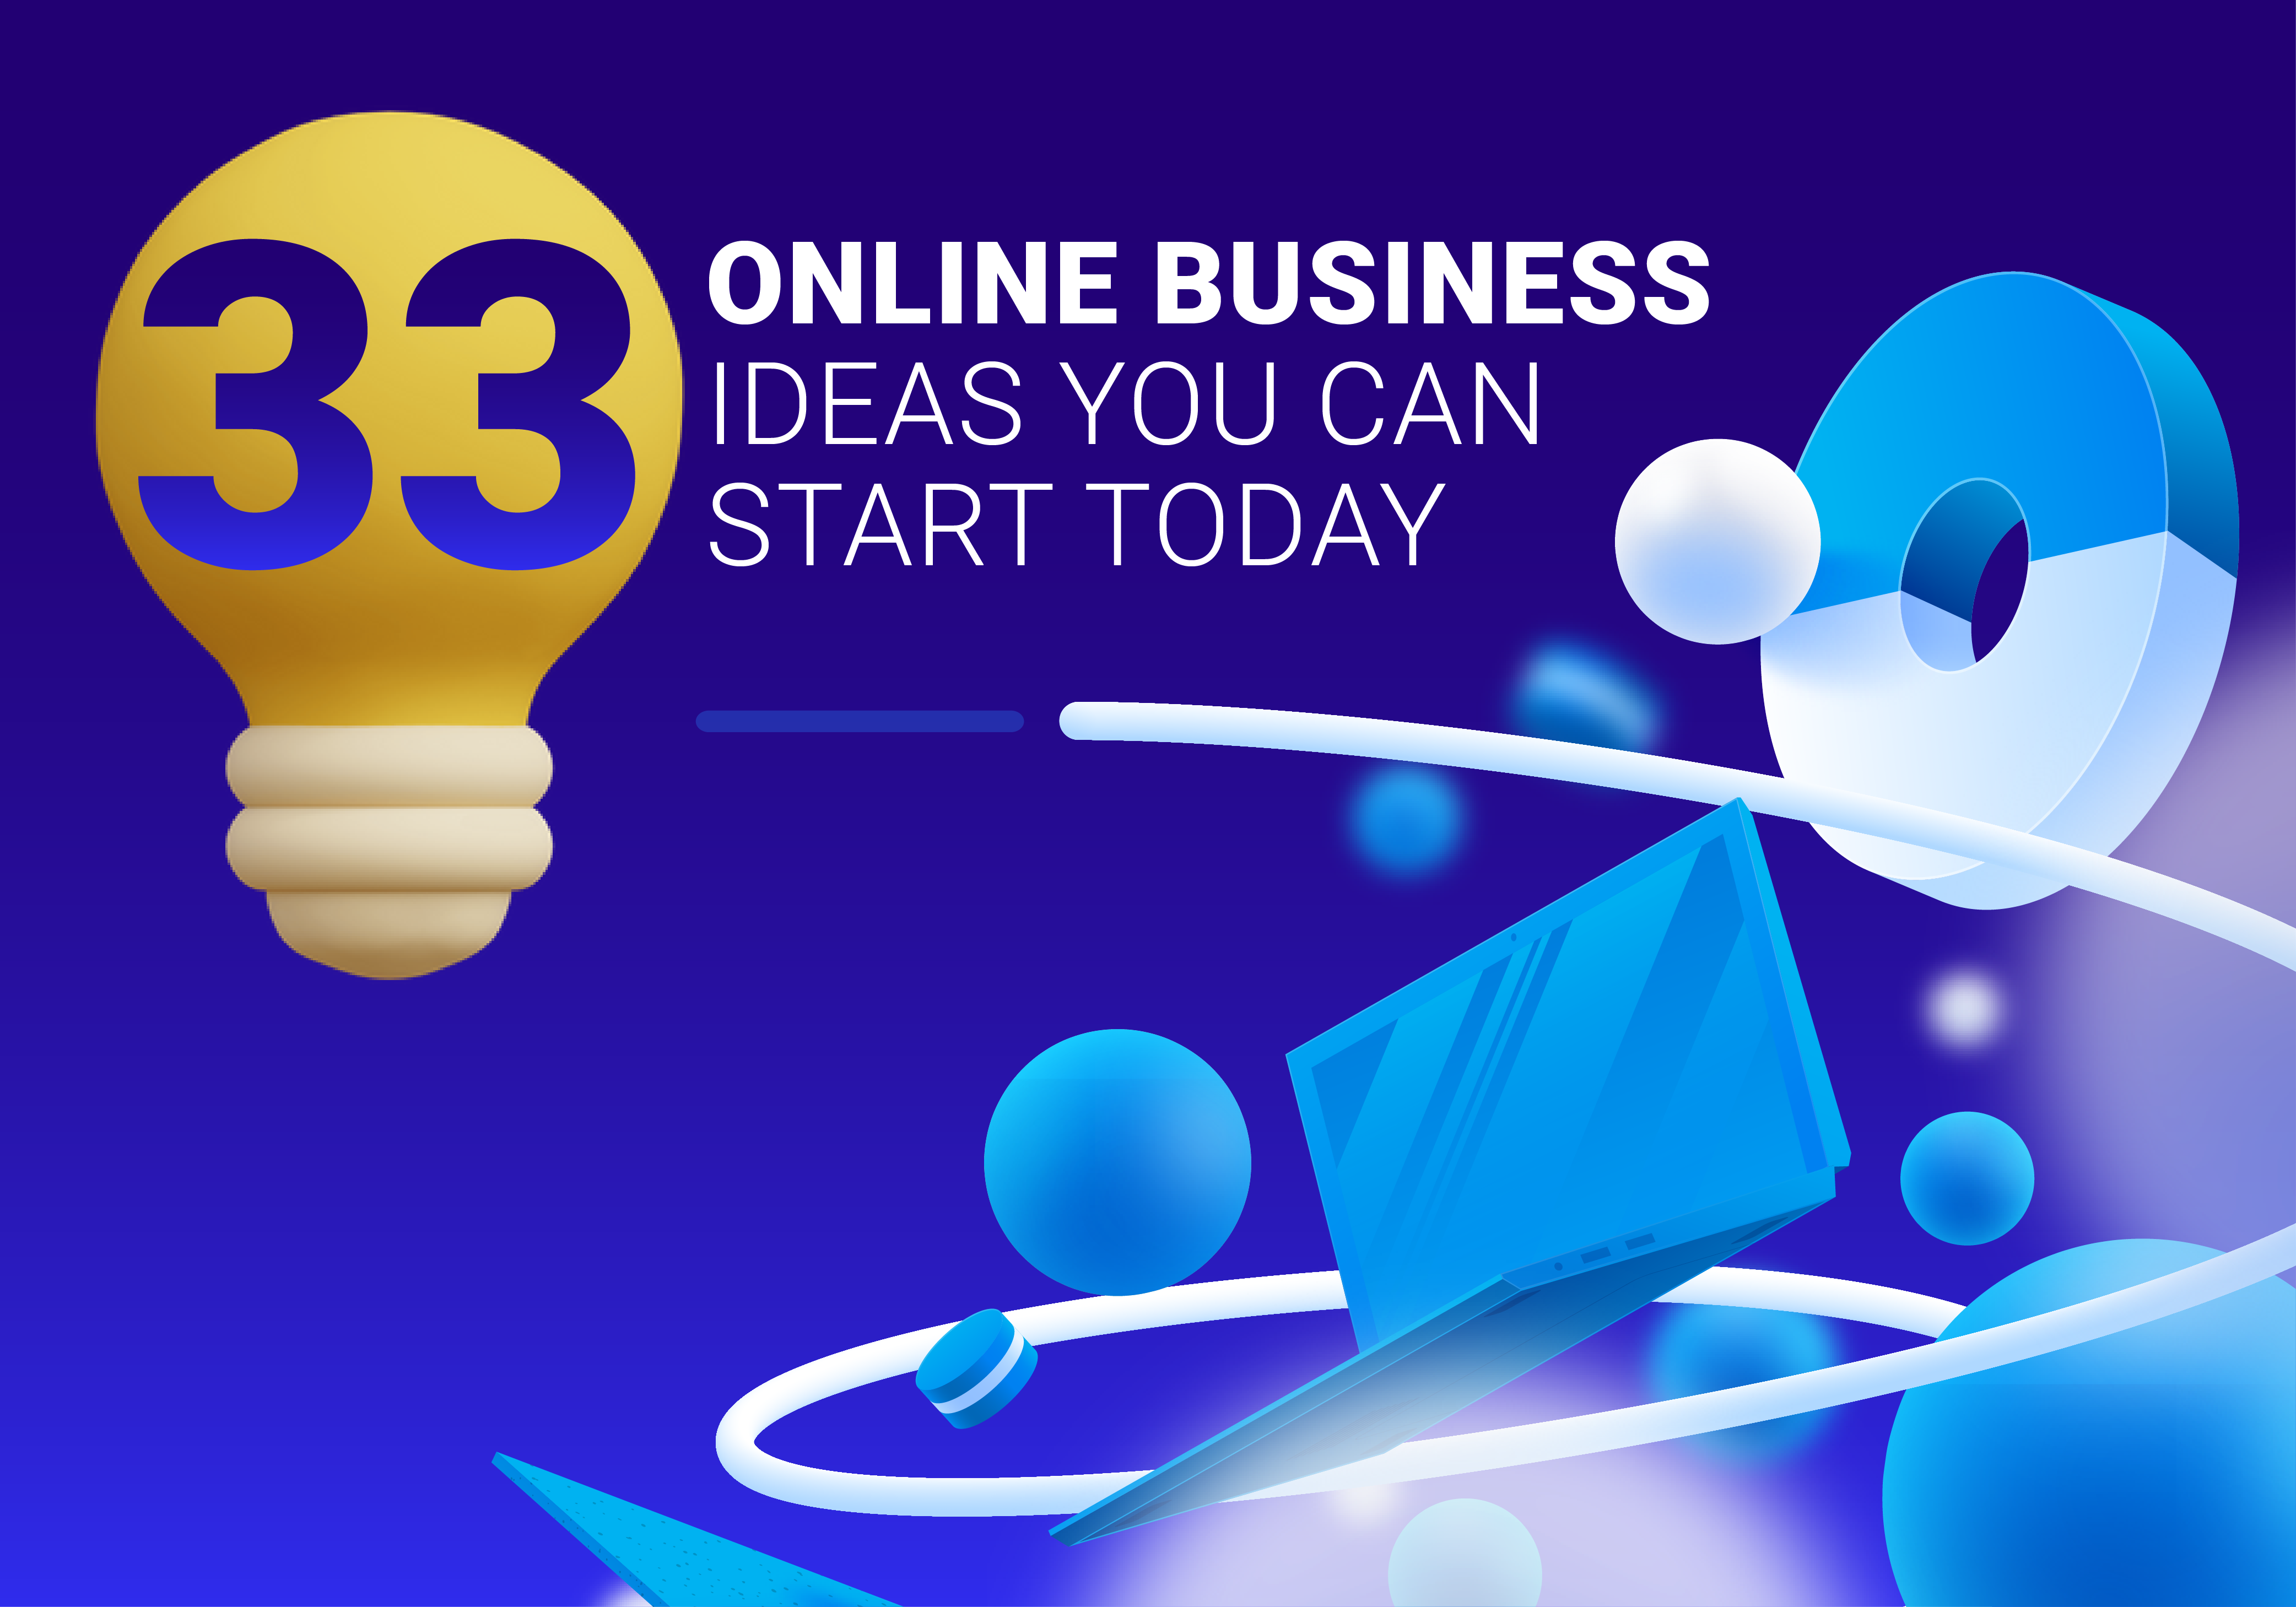 33 Online Business Ideas You Can Start Today